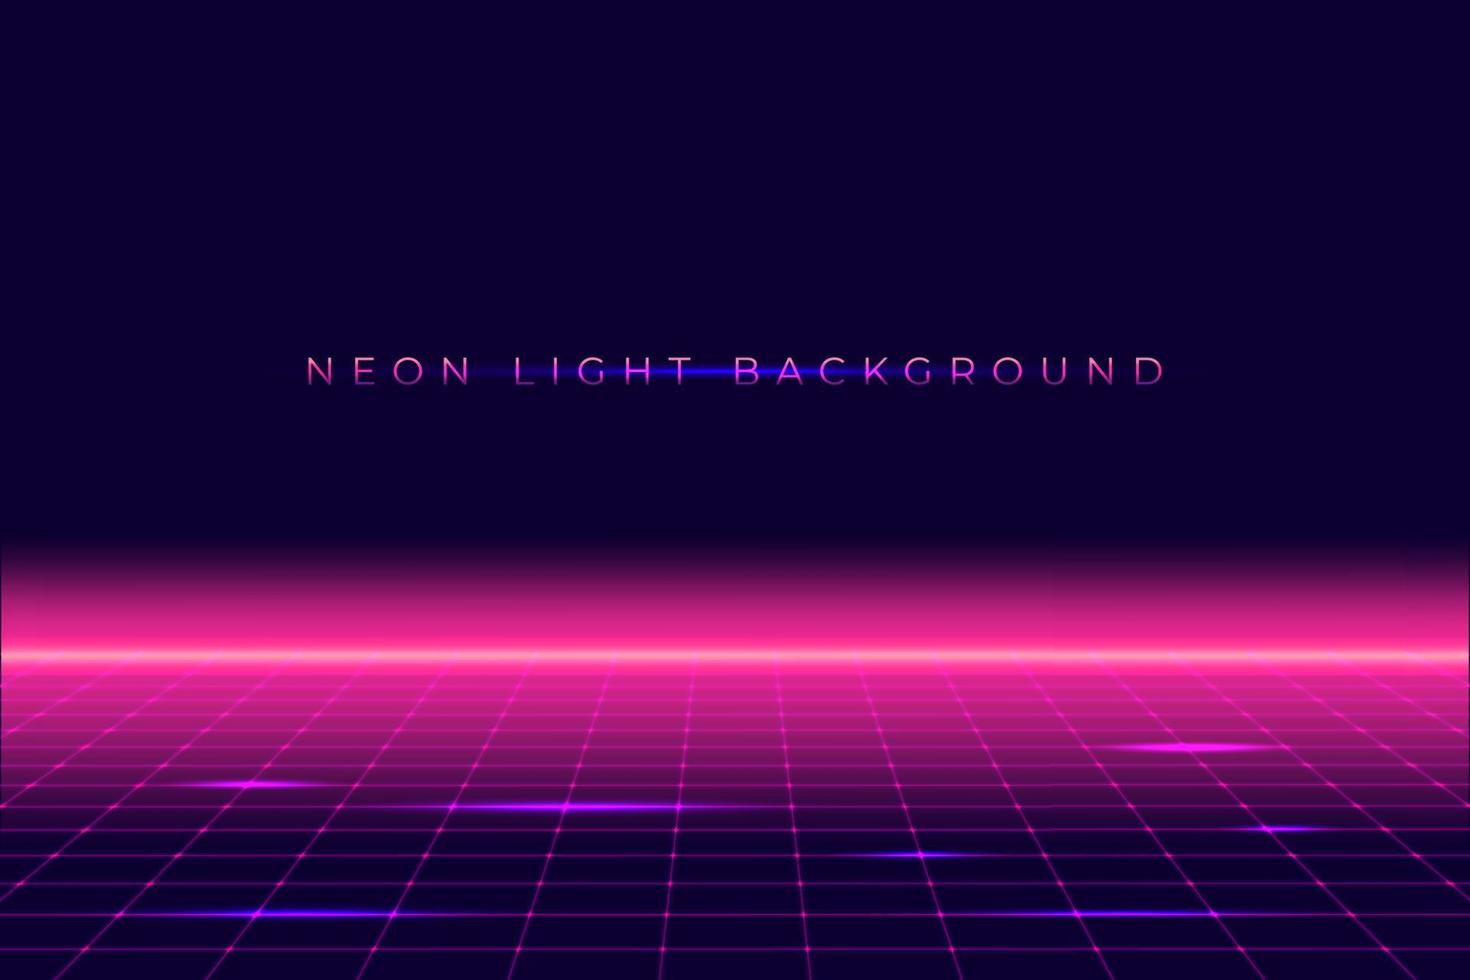 A dark background with a grid and neon lights - Synthwave